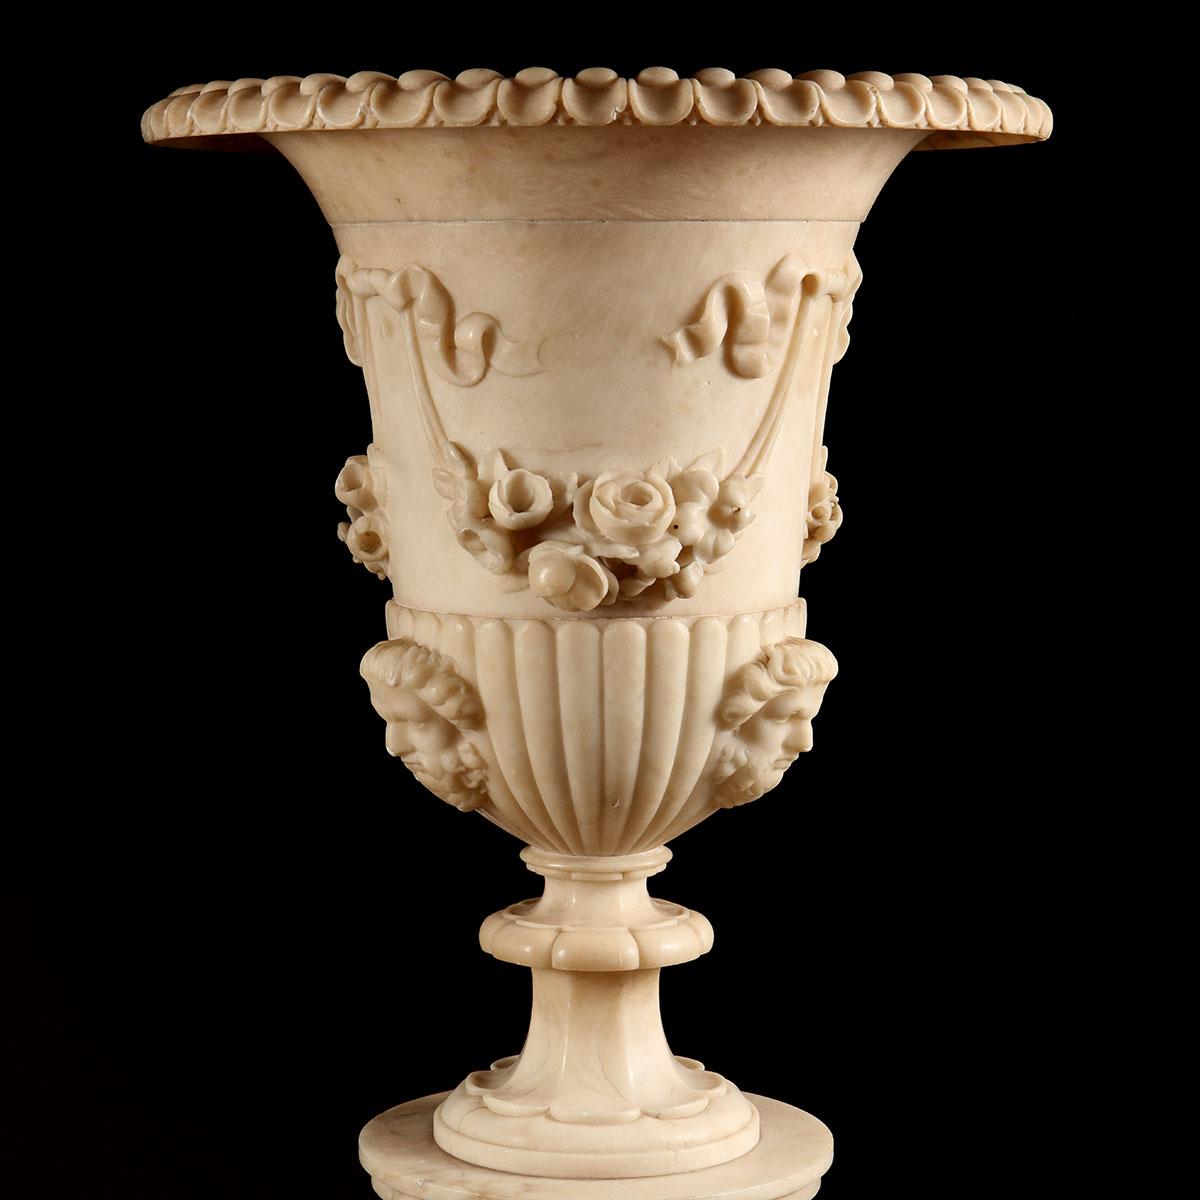 Floor standing classically carved alabaster vases on fluted columns and square stepped pedestals

Carved with Satyre masks and foliate swags suspended from ribbons
Electrified and Illuminated throughout, including the base, the column, and the